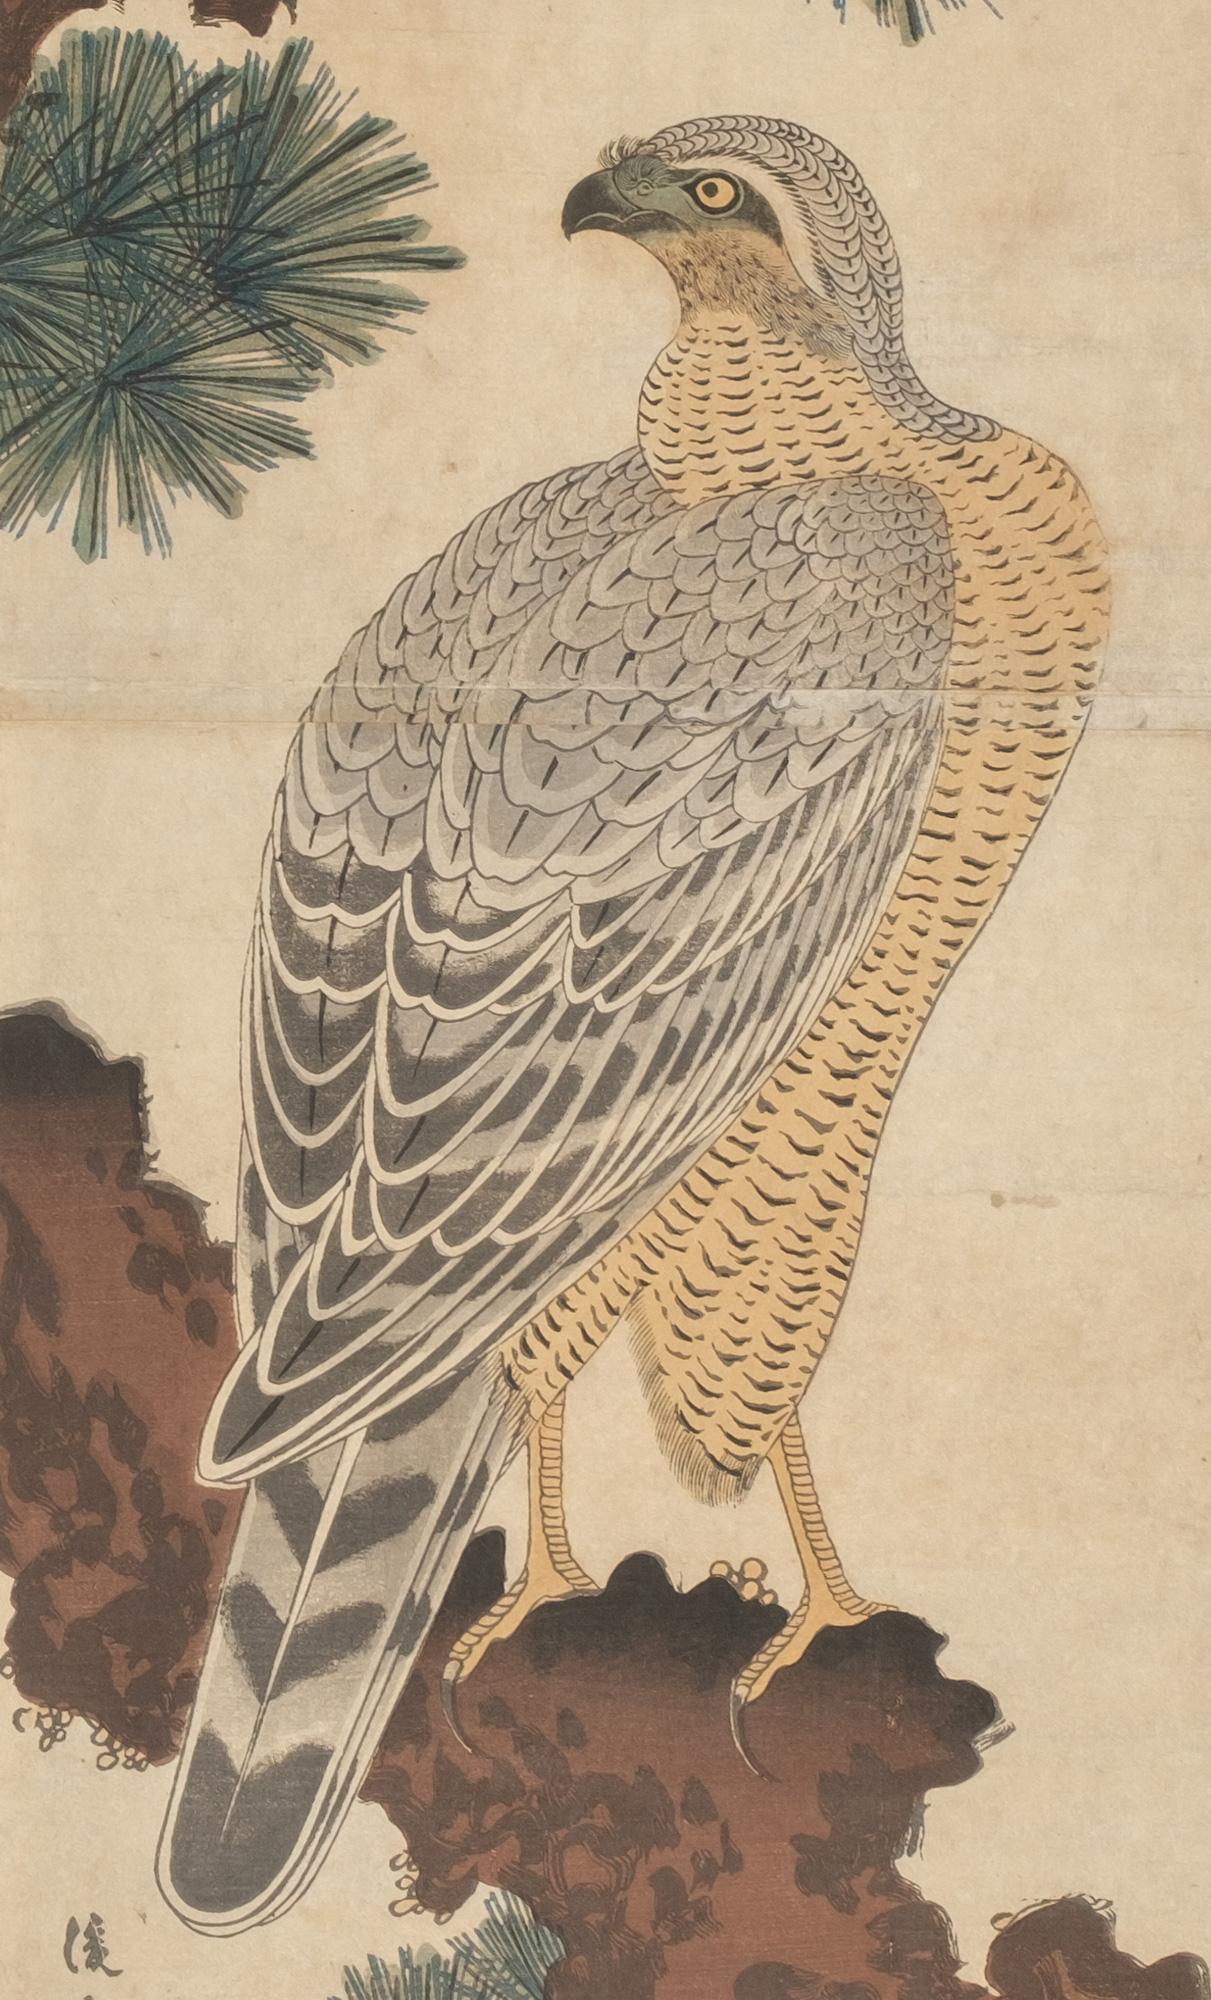 Utagawa Toyoshige (Toyokuni II) (1777-1835), diptych woodblock print of a majestic falcon (taka) sitting on a pine tree branch ? (matsu) under a rising sun.
This popular genre is known as ‘kachô-ga’ (pictures of birds and flowers).

Date: Around